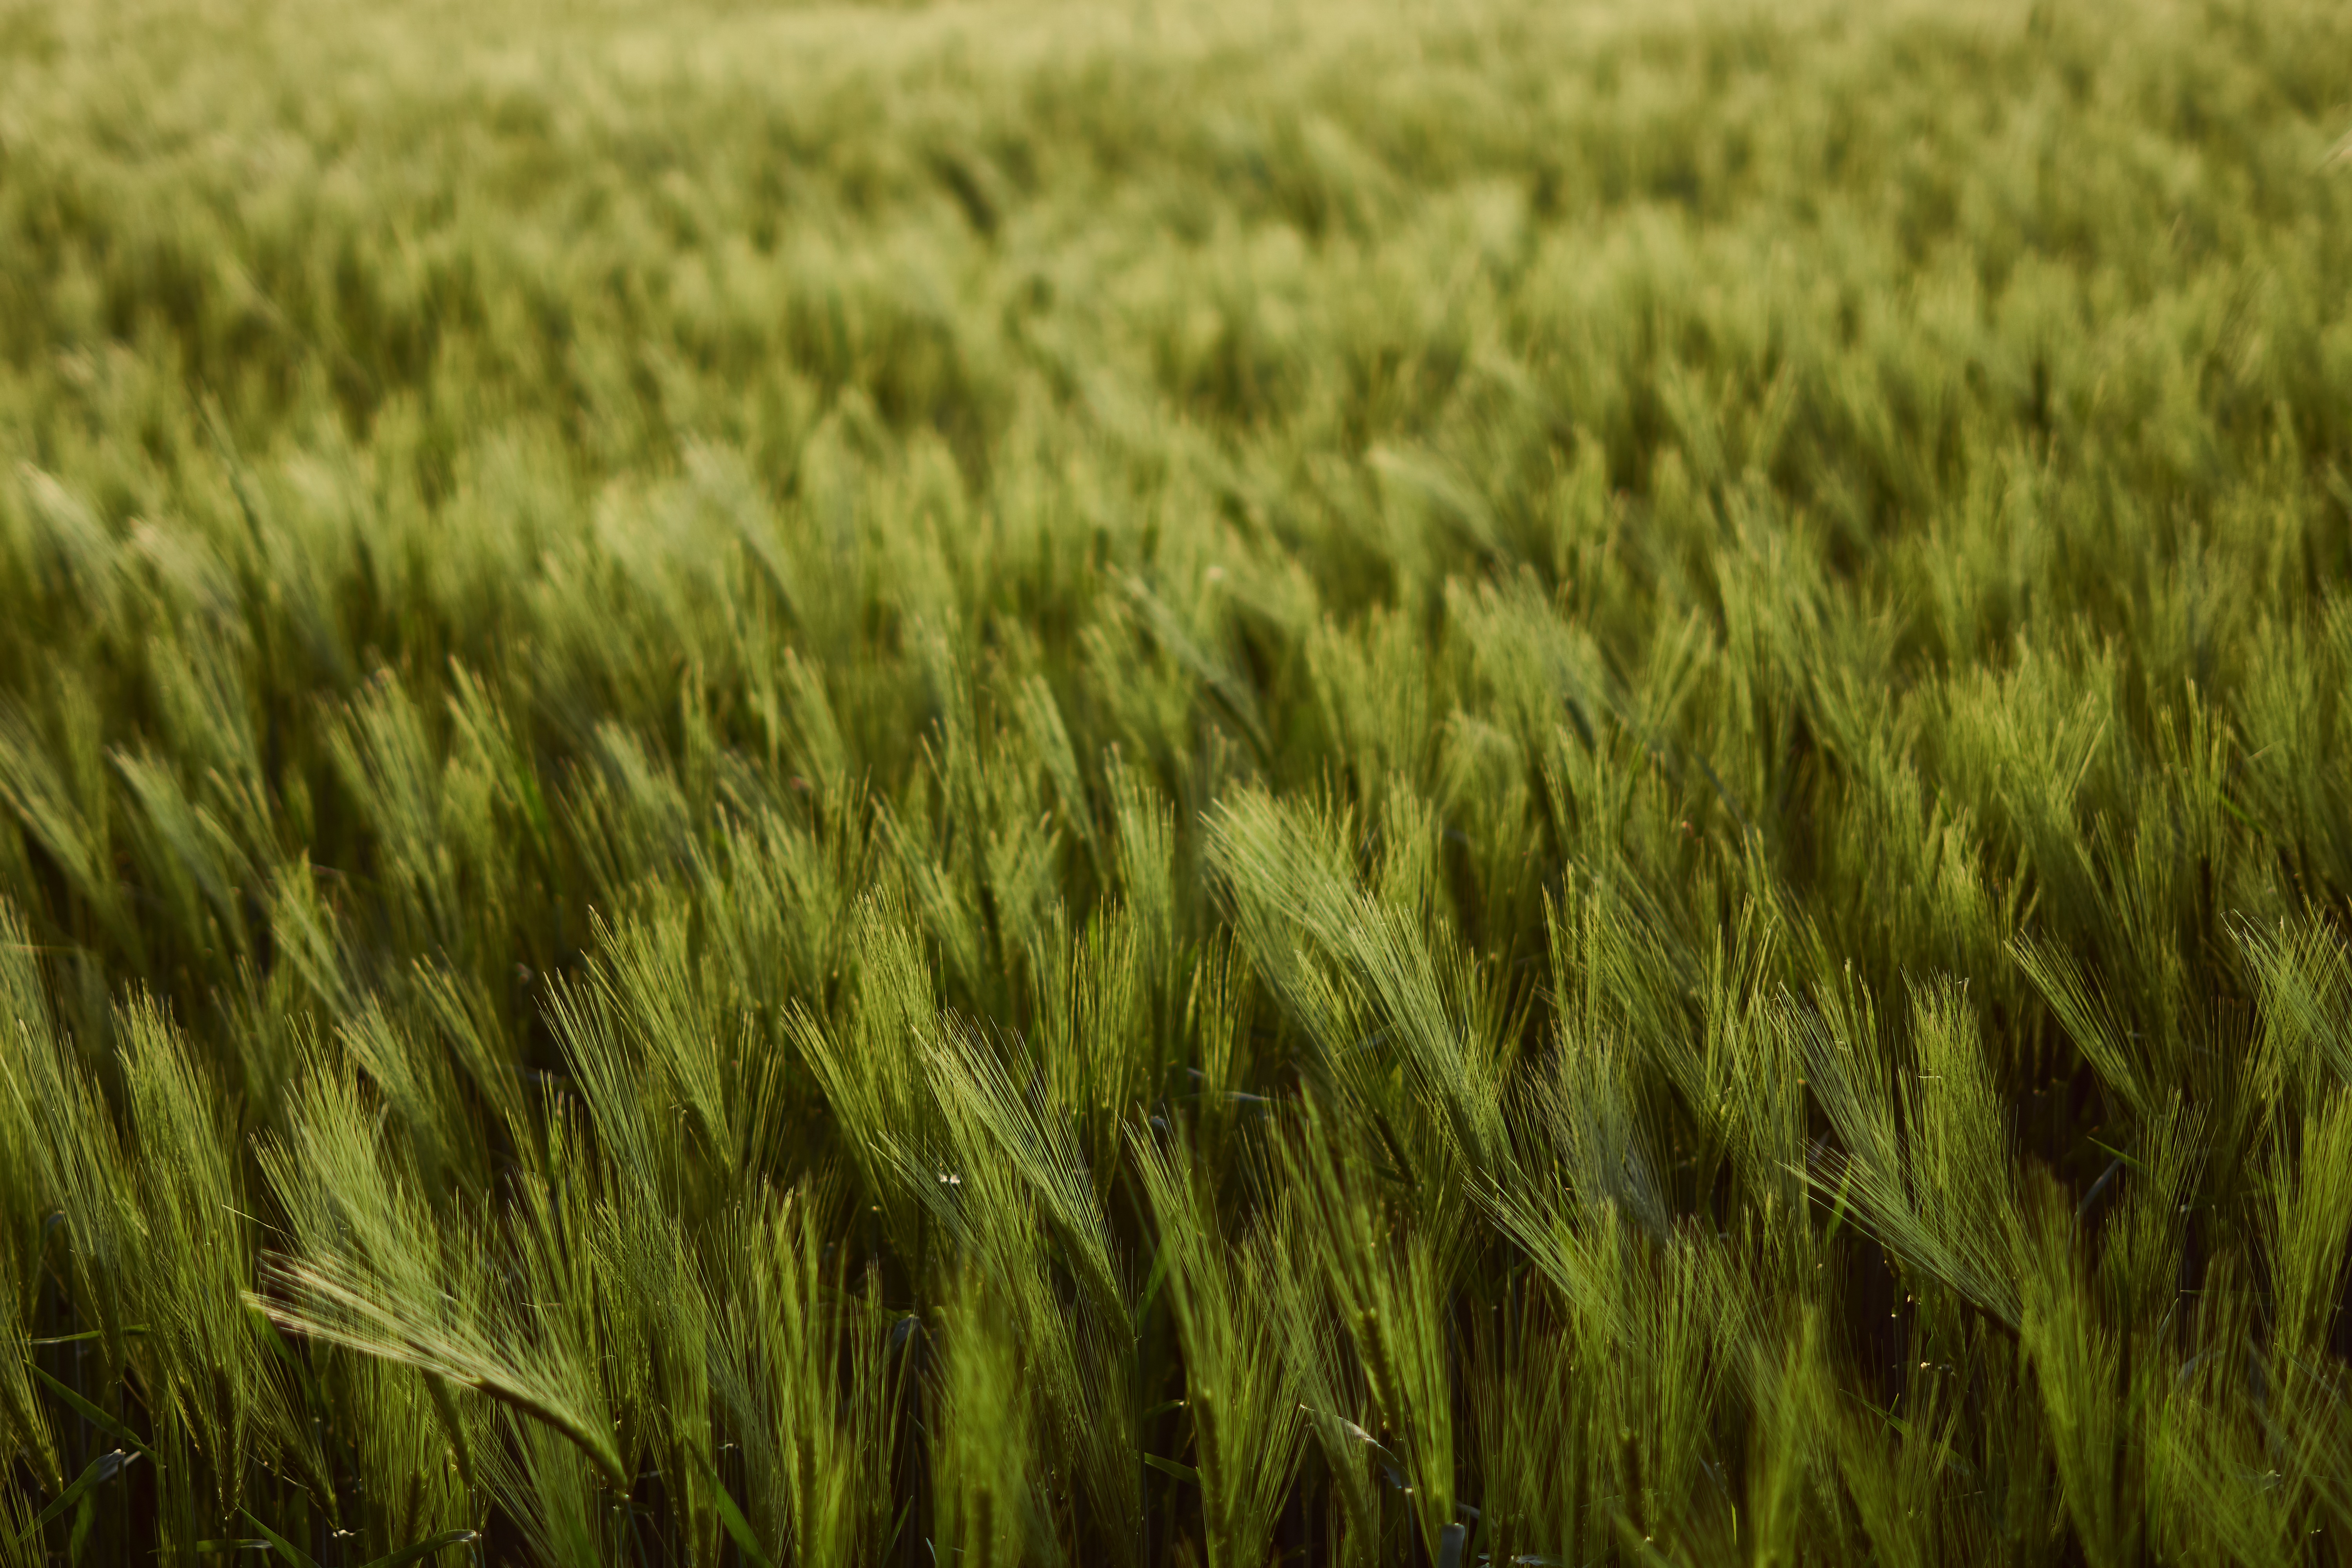 harvest, nature, wheat, green, field, thick, ears, spikes